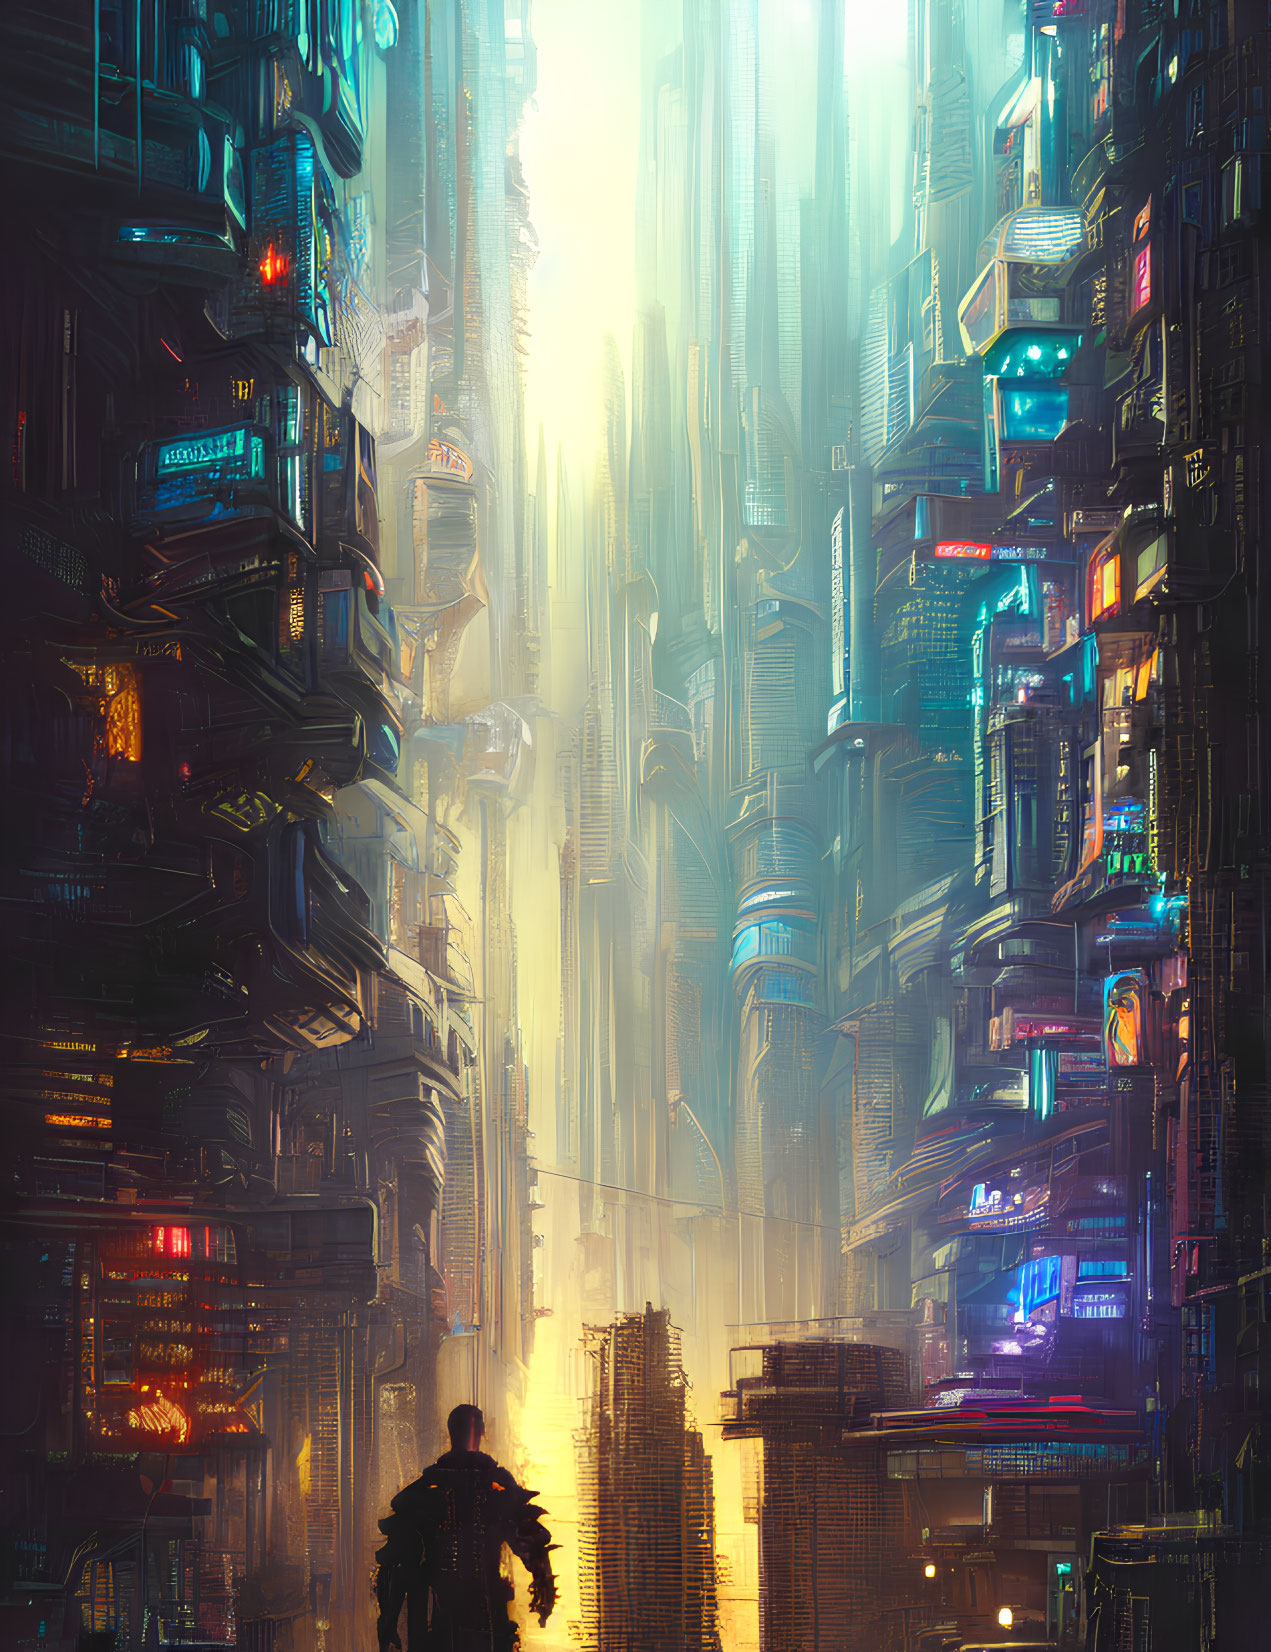 Futuristic cityscape with glowing lights and neon signs